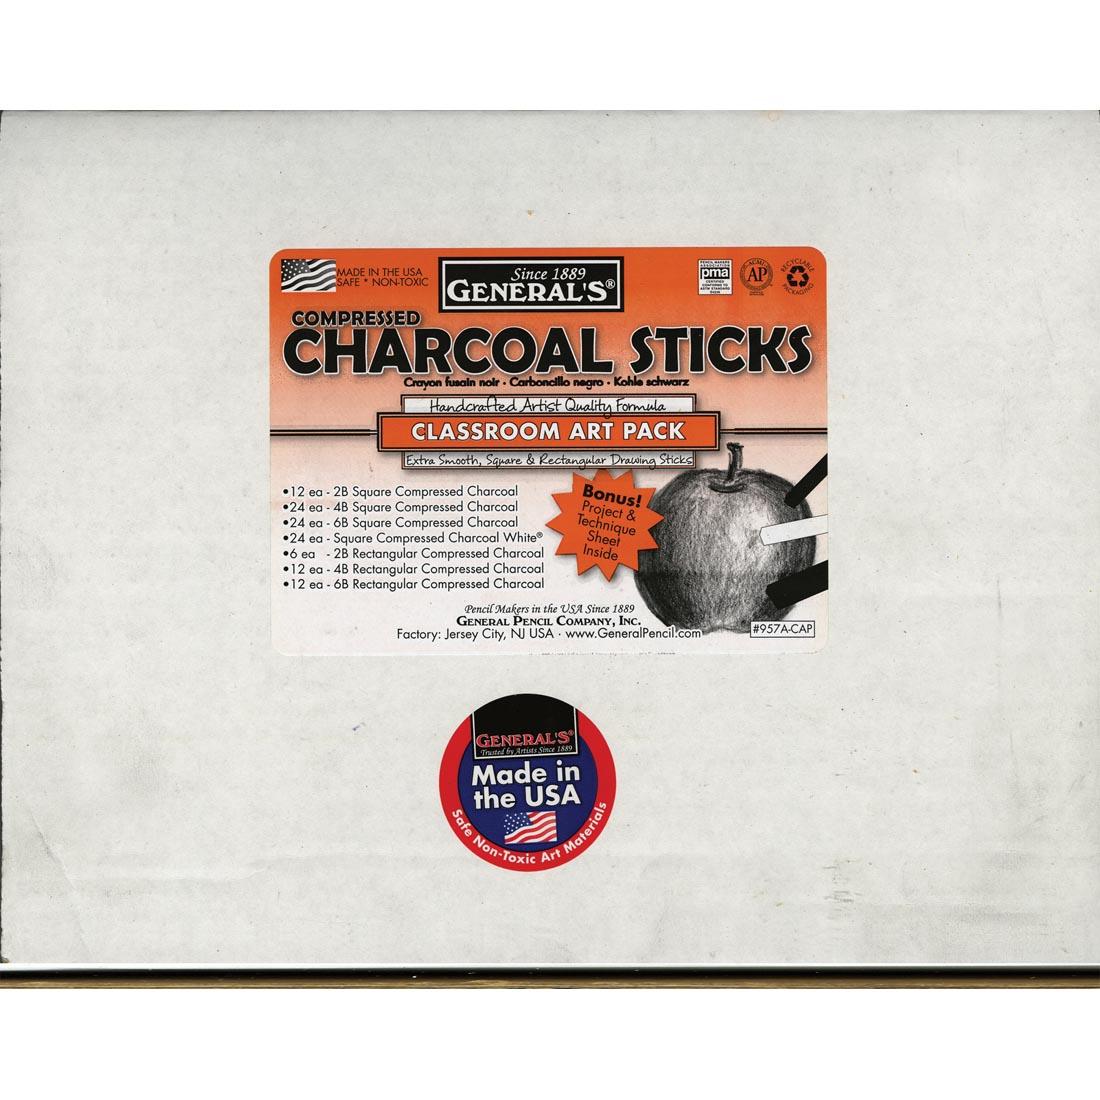 General's Compressed Charcoal Sticks Classroom Art Pack